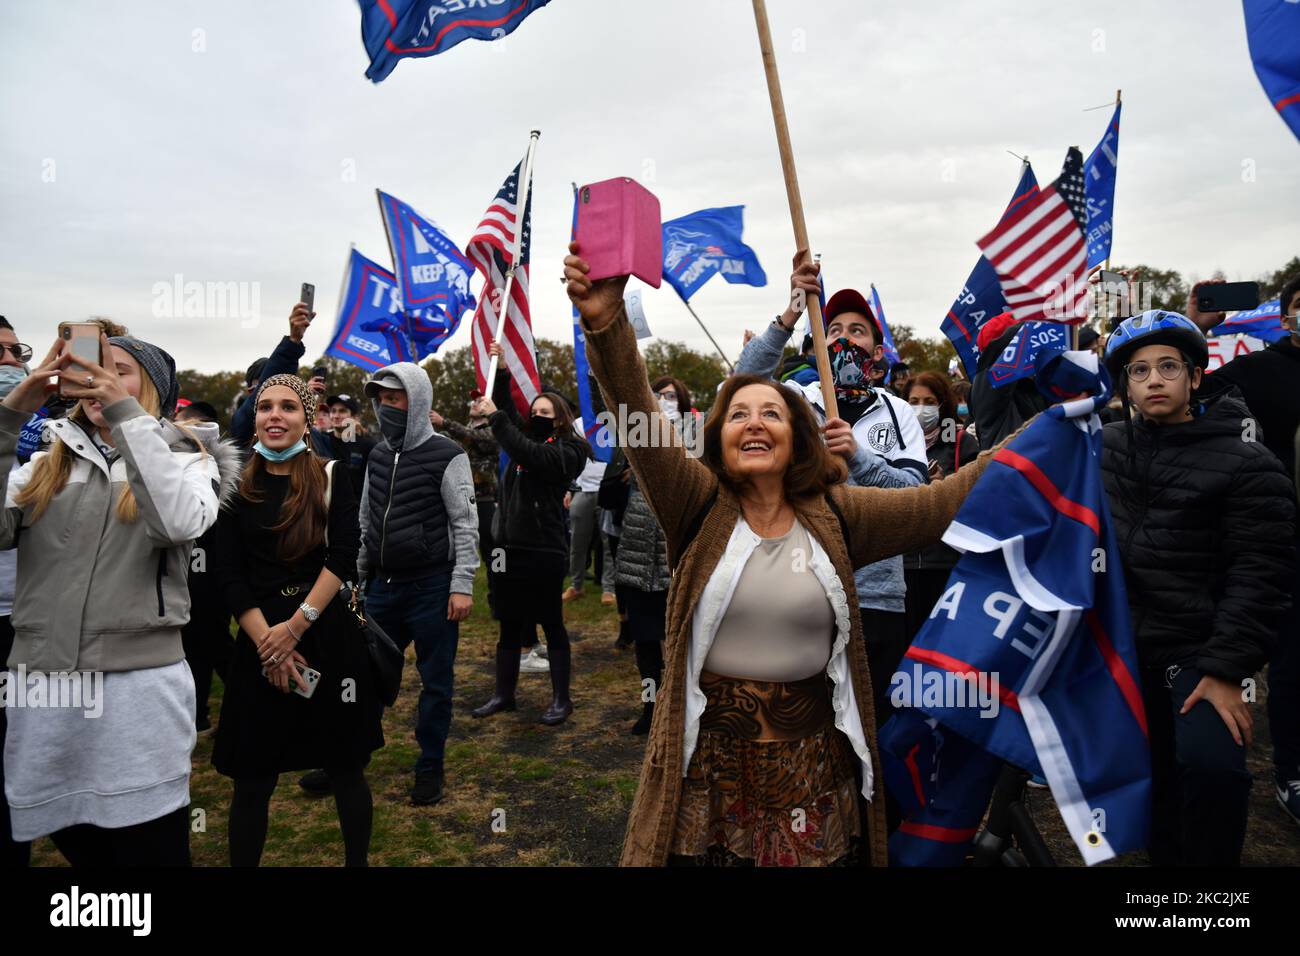 A 'Trump Parade' of roughly 200 cars traveled throughout New York City culminating in a rally of roughly 1,500 Trump supporters in Brooklyn, New York on Sunday, 25 October 2020. (B.A. Van Sise/NurPhoto) (Photo by B.A. Van Sise/NurPhoto) Stock Photo